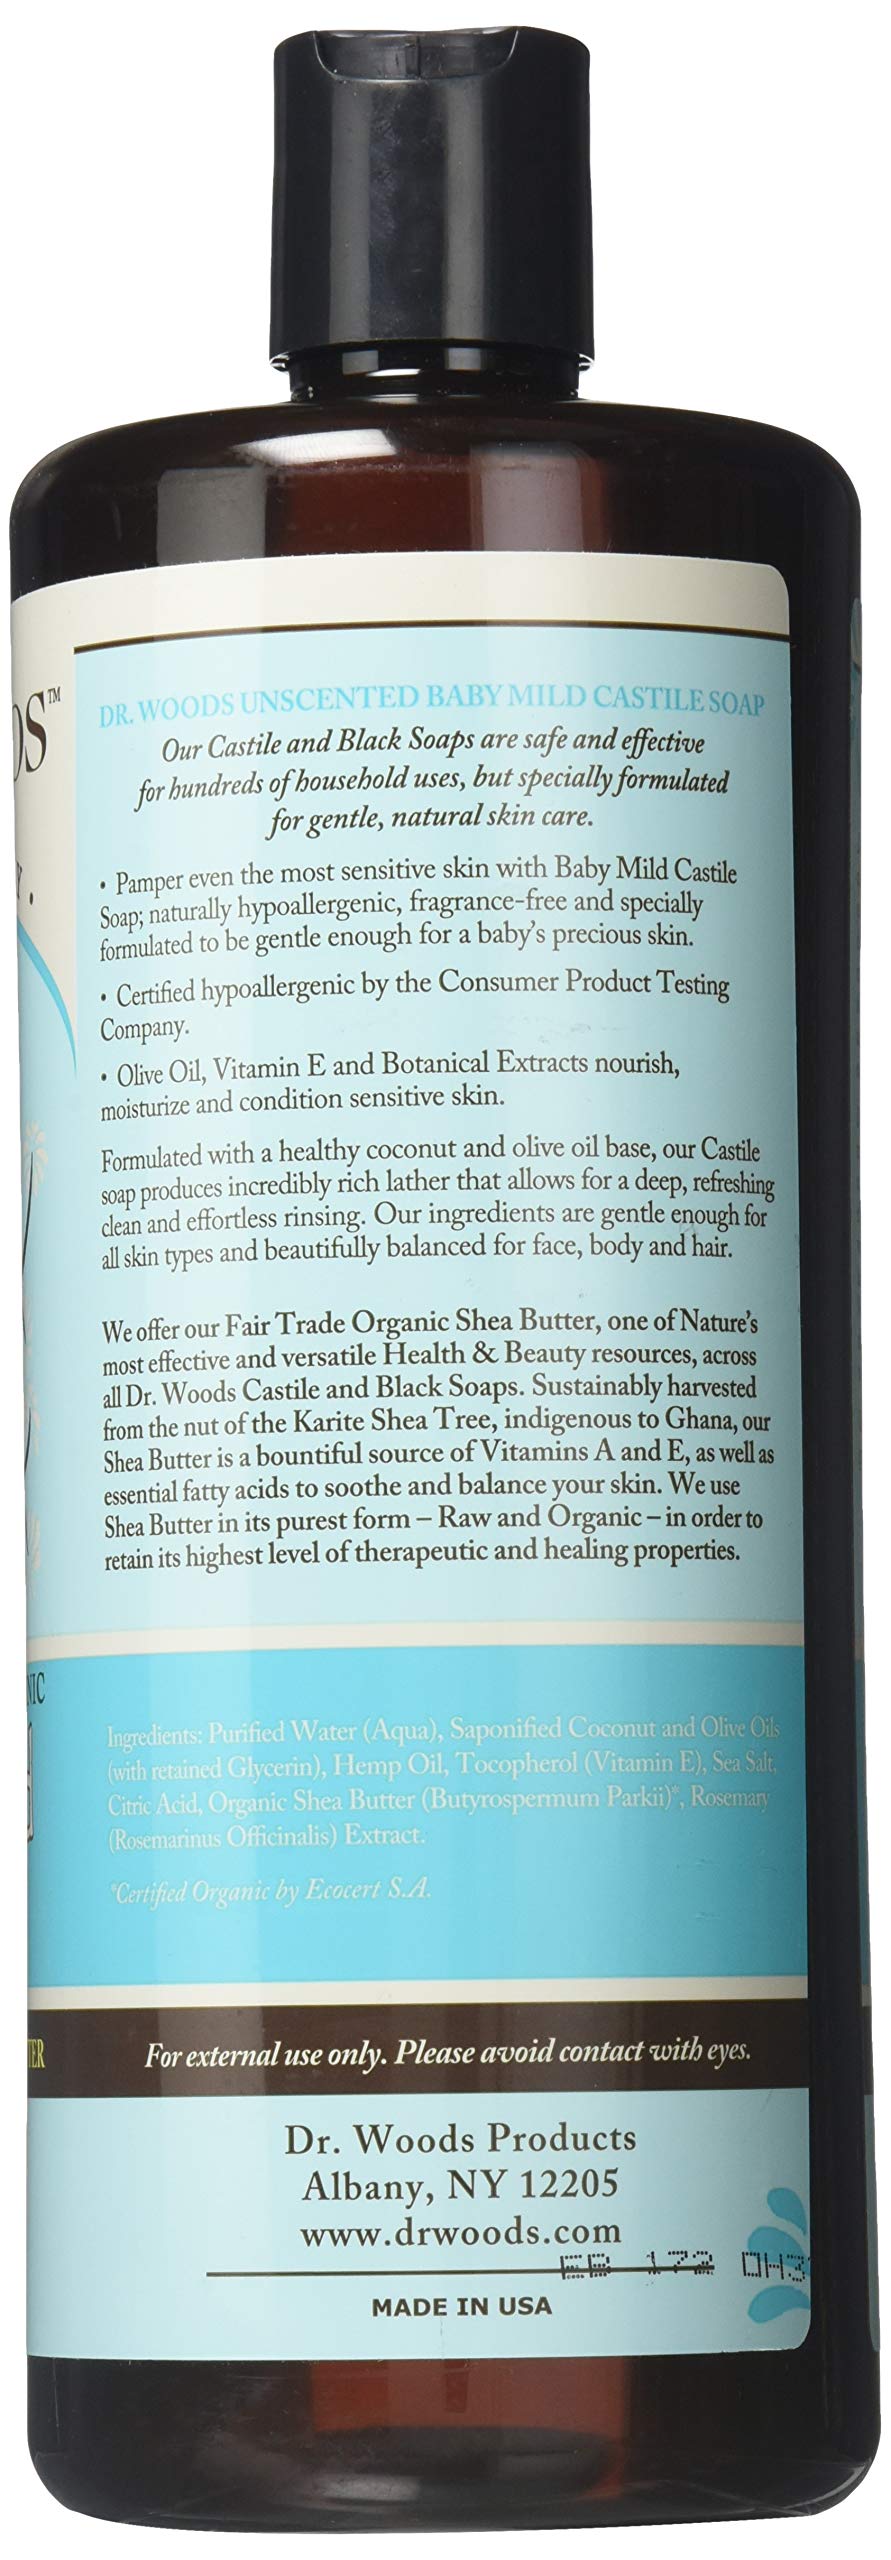 Dr. Woods Unscented Baby Mild Liquid Castile Soap with Organic Shea Butter, 32 Ounce